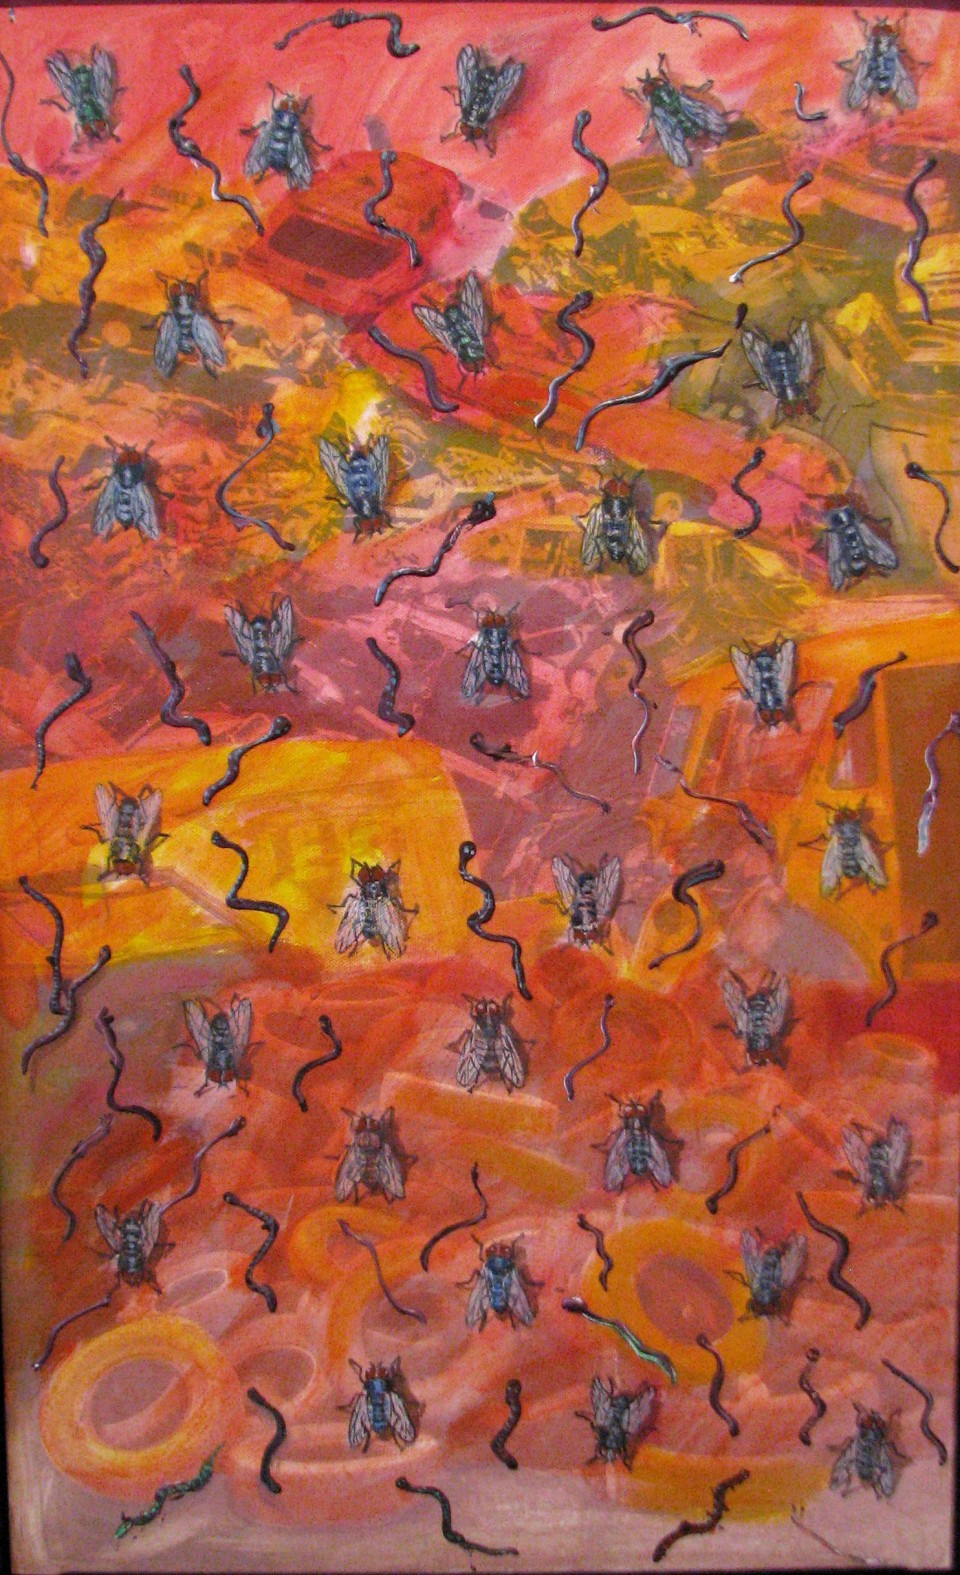 Untitled (Crush with Flies), Ca. 1990
Mixed Media on Canvas